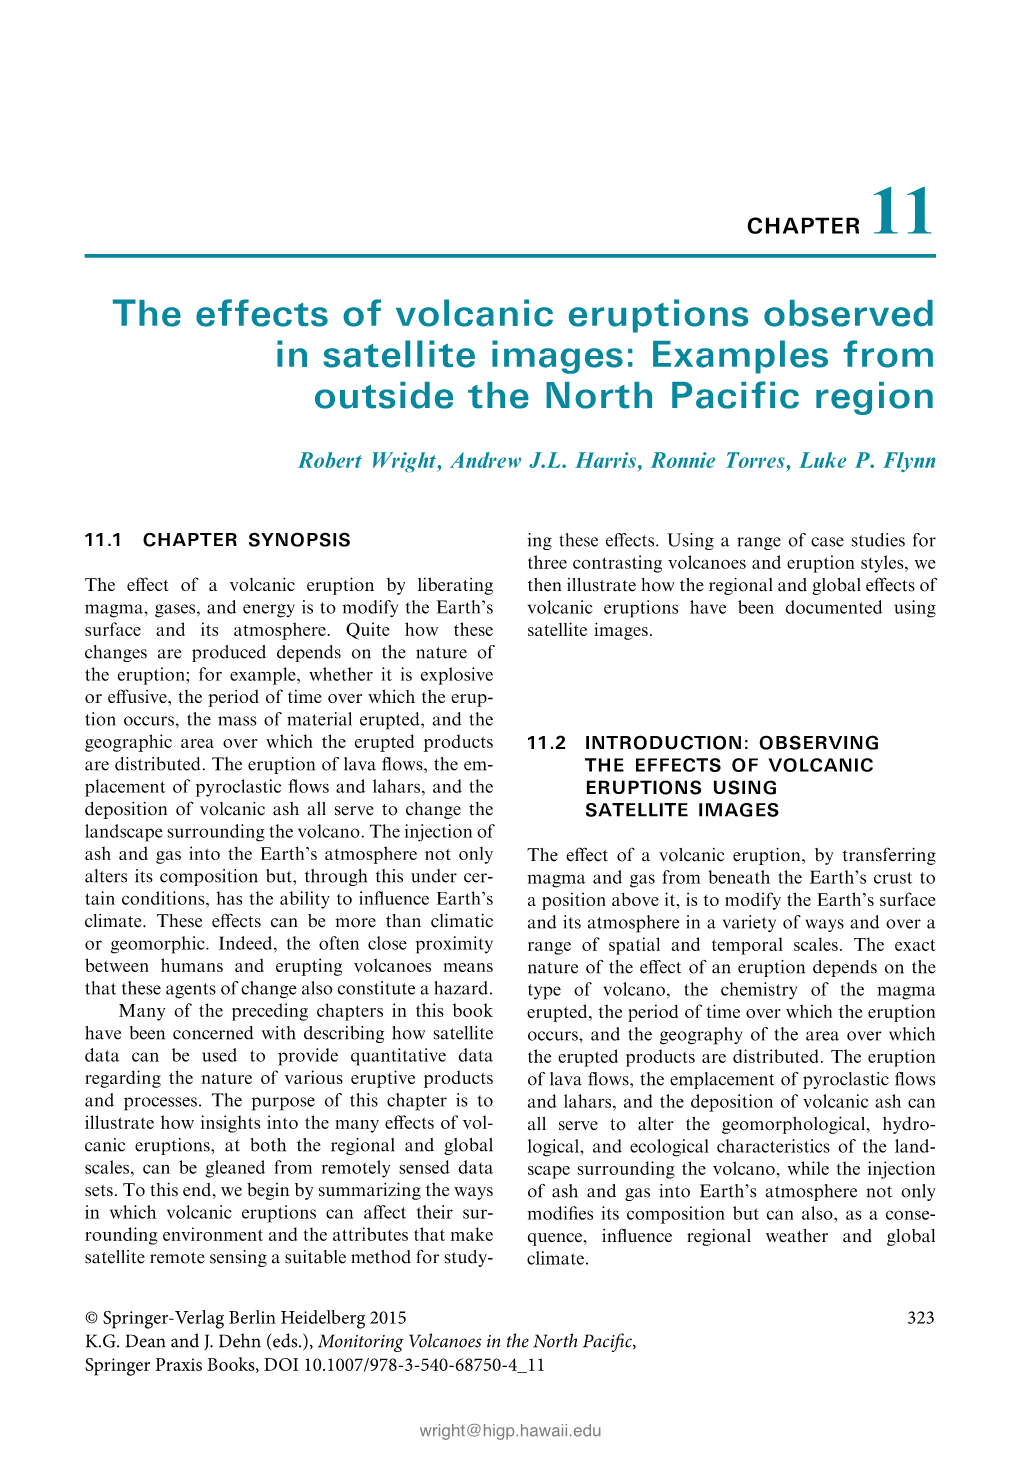 The Effects of Volcanic Eruptions Observed in Satellite Images: Examples from Outside the North Pacific Region